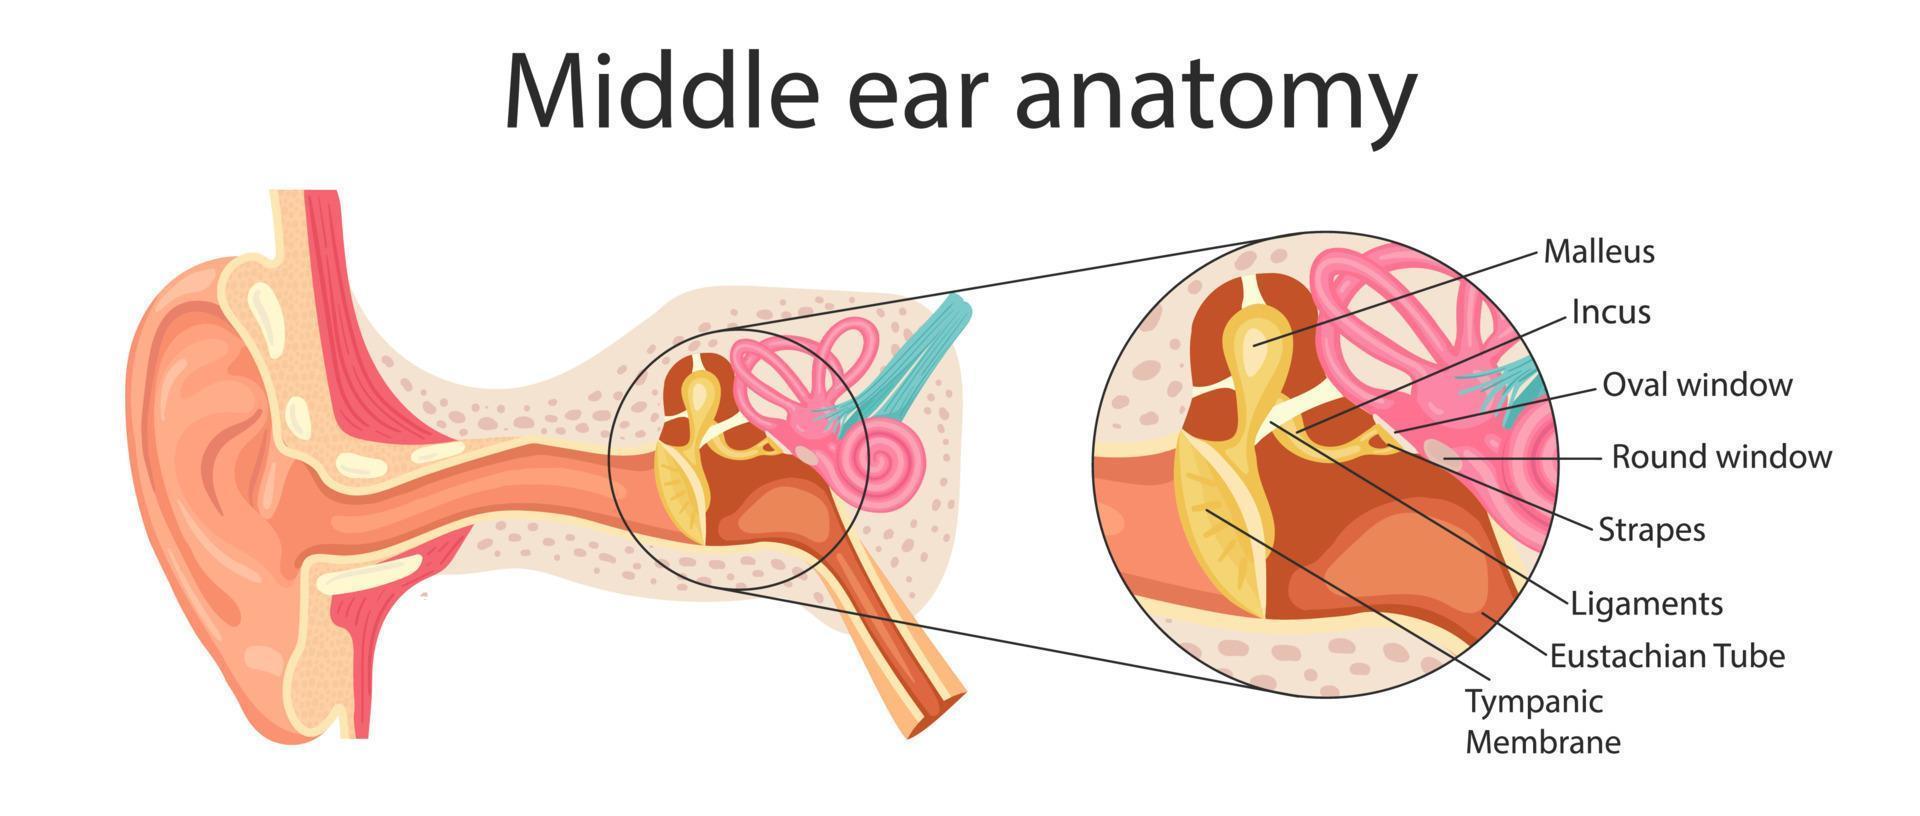 Anatomy of the middle ear. Detailed illustration for educational, medical, biological and scientific purposes. vector